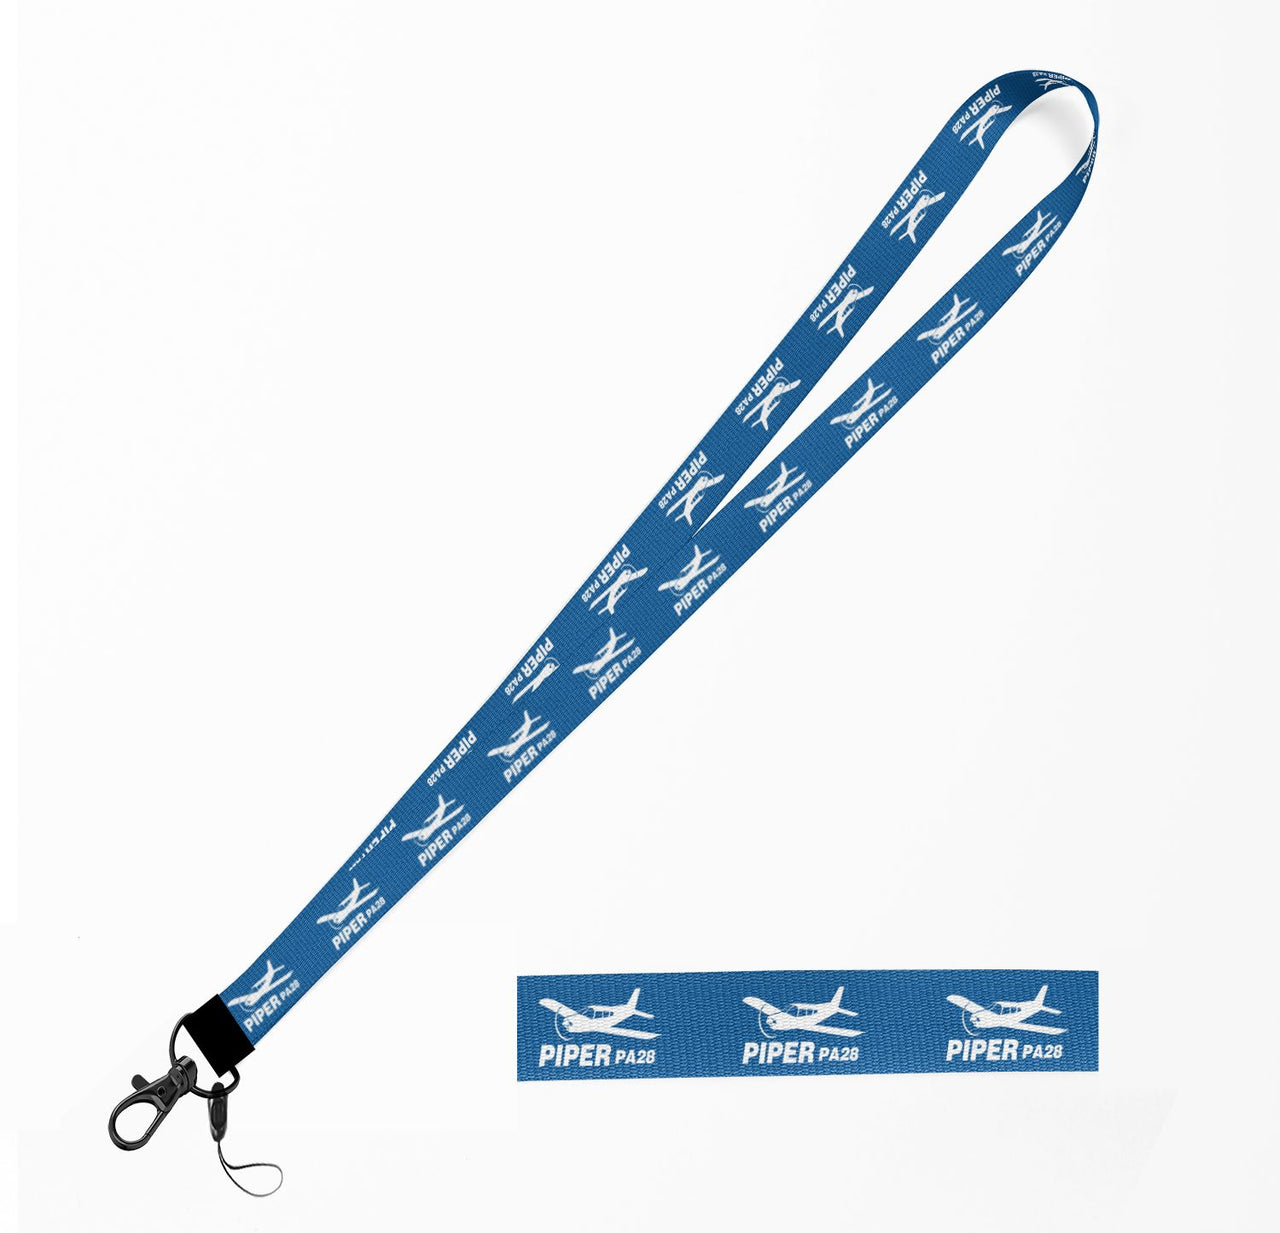 The Piper PA28 Designed Lanyard & ID Holders